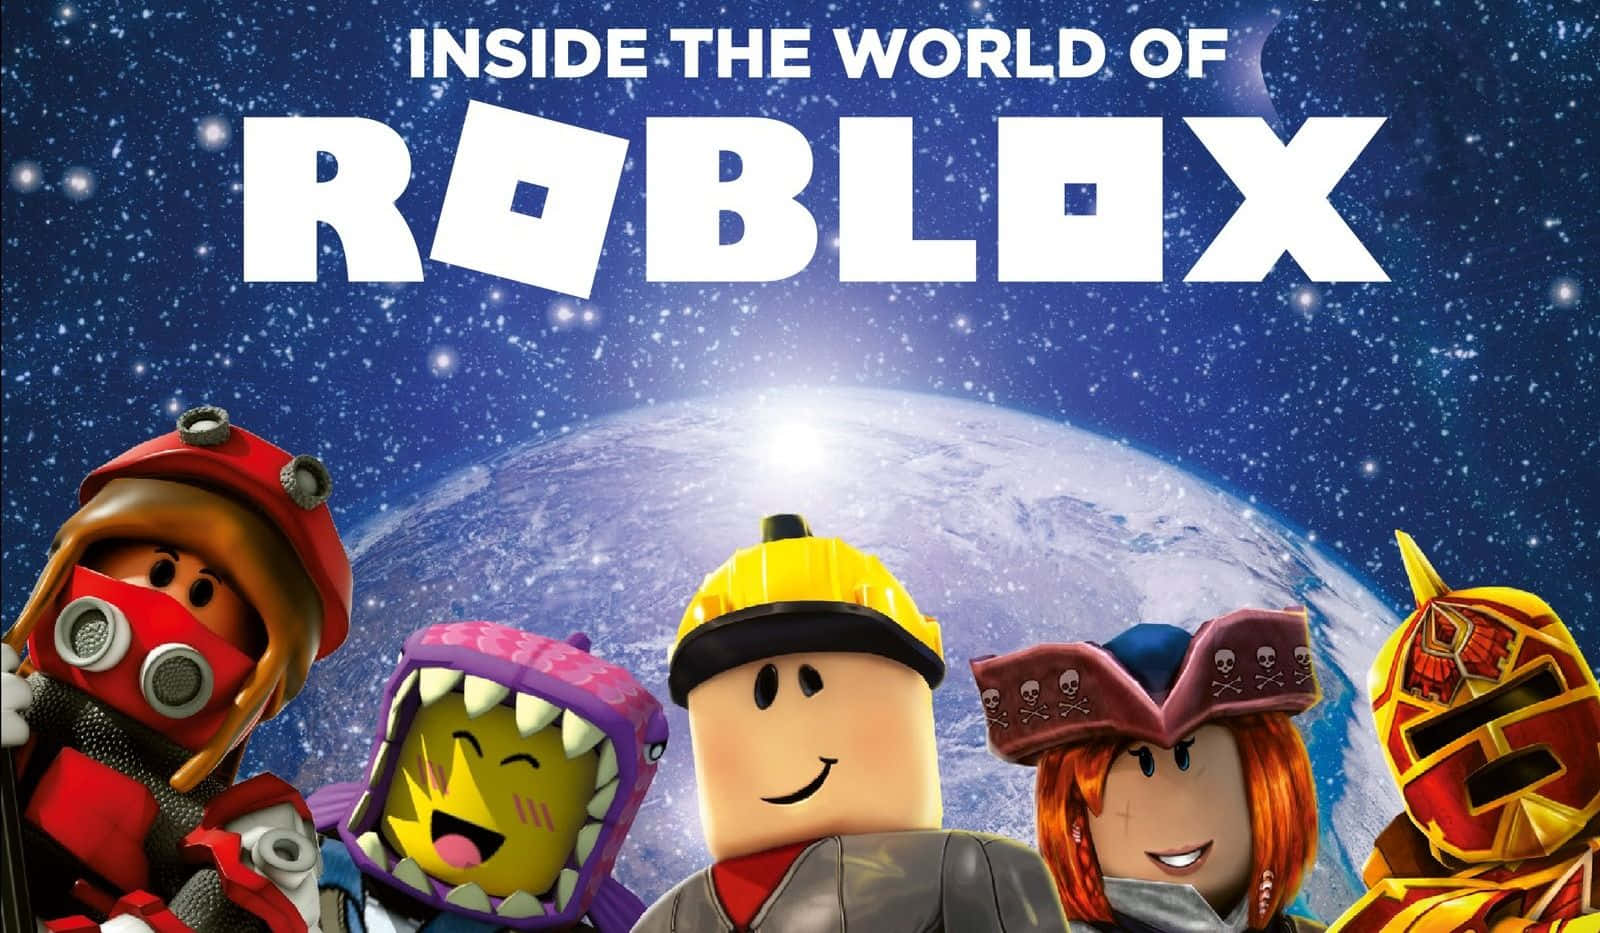 Get creative and explore with your Roblox avatar!